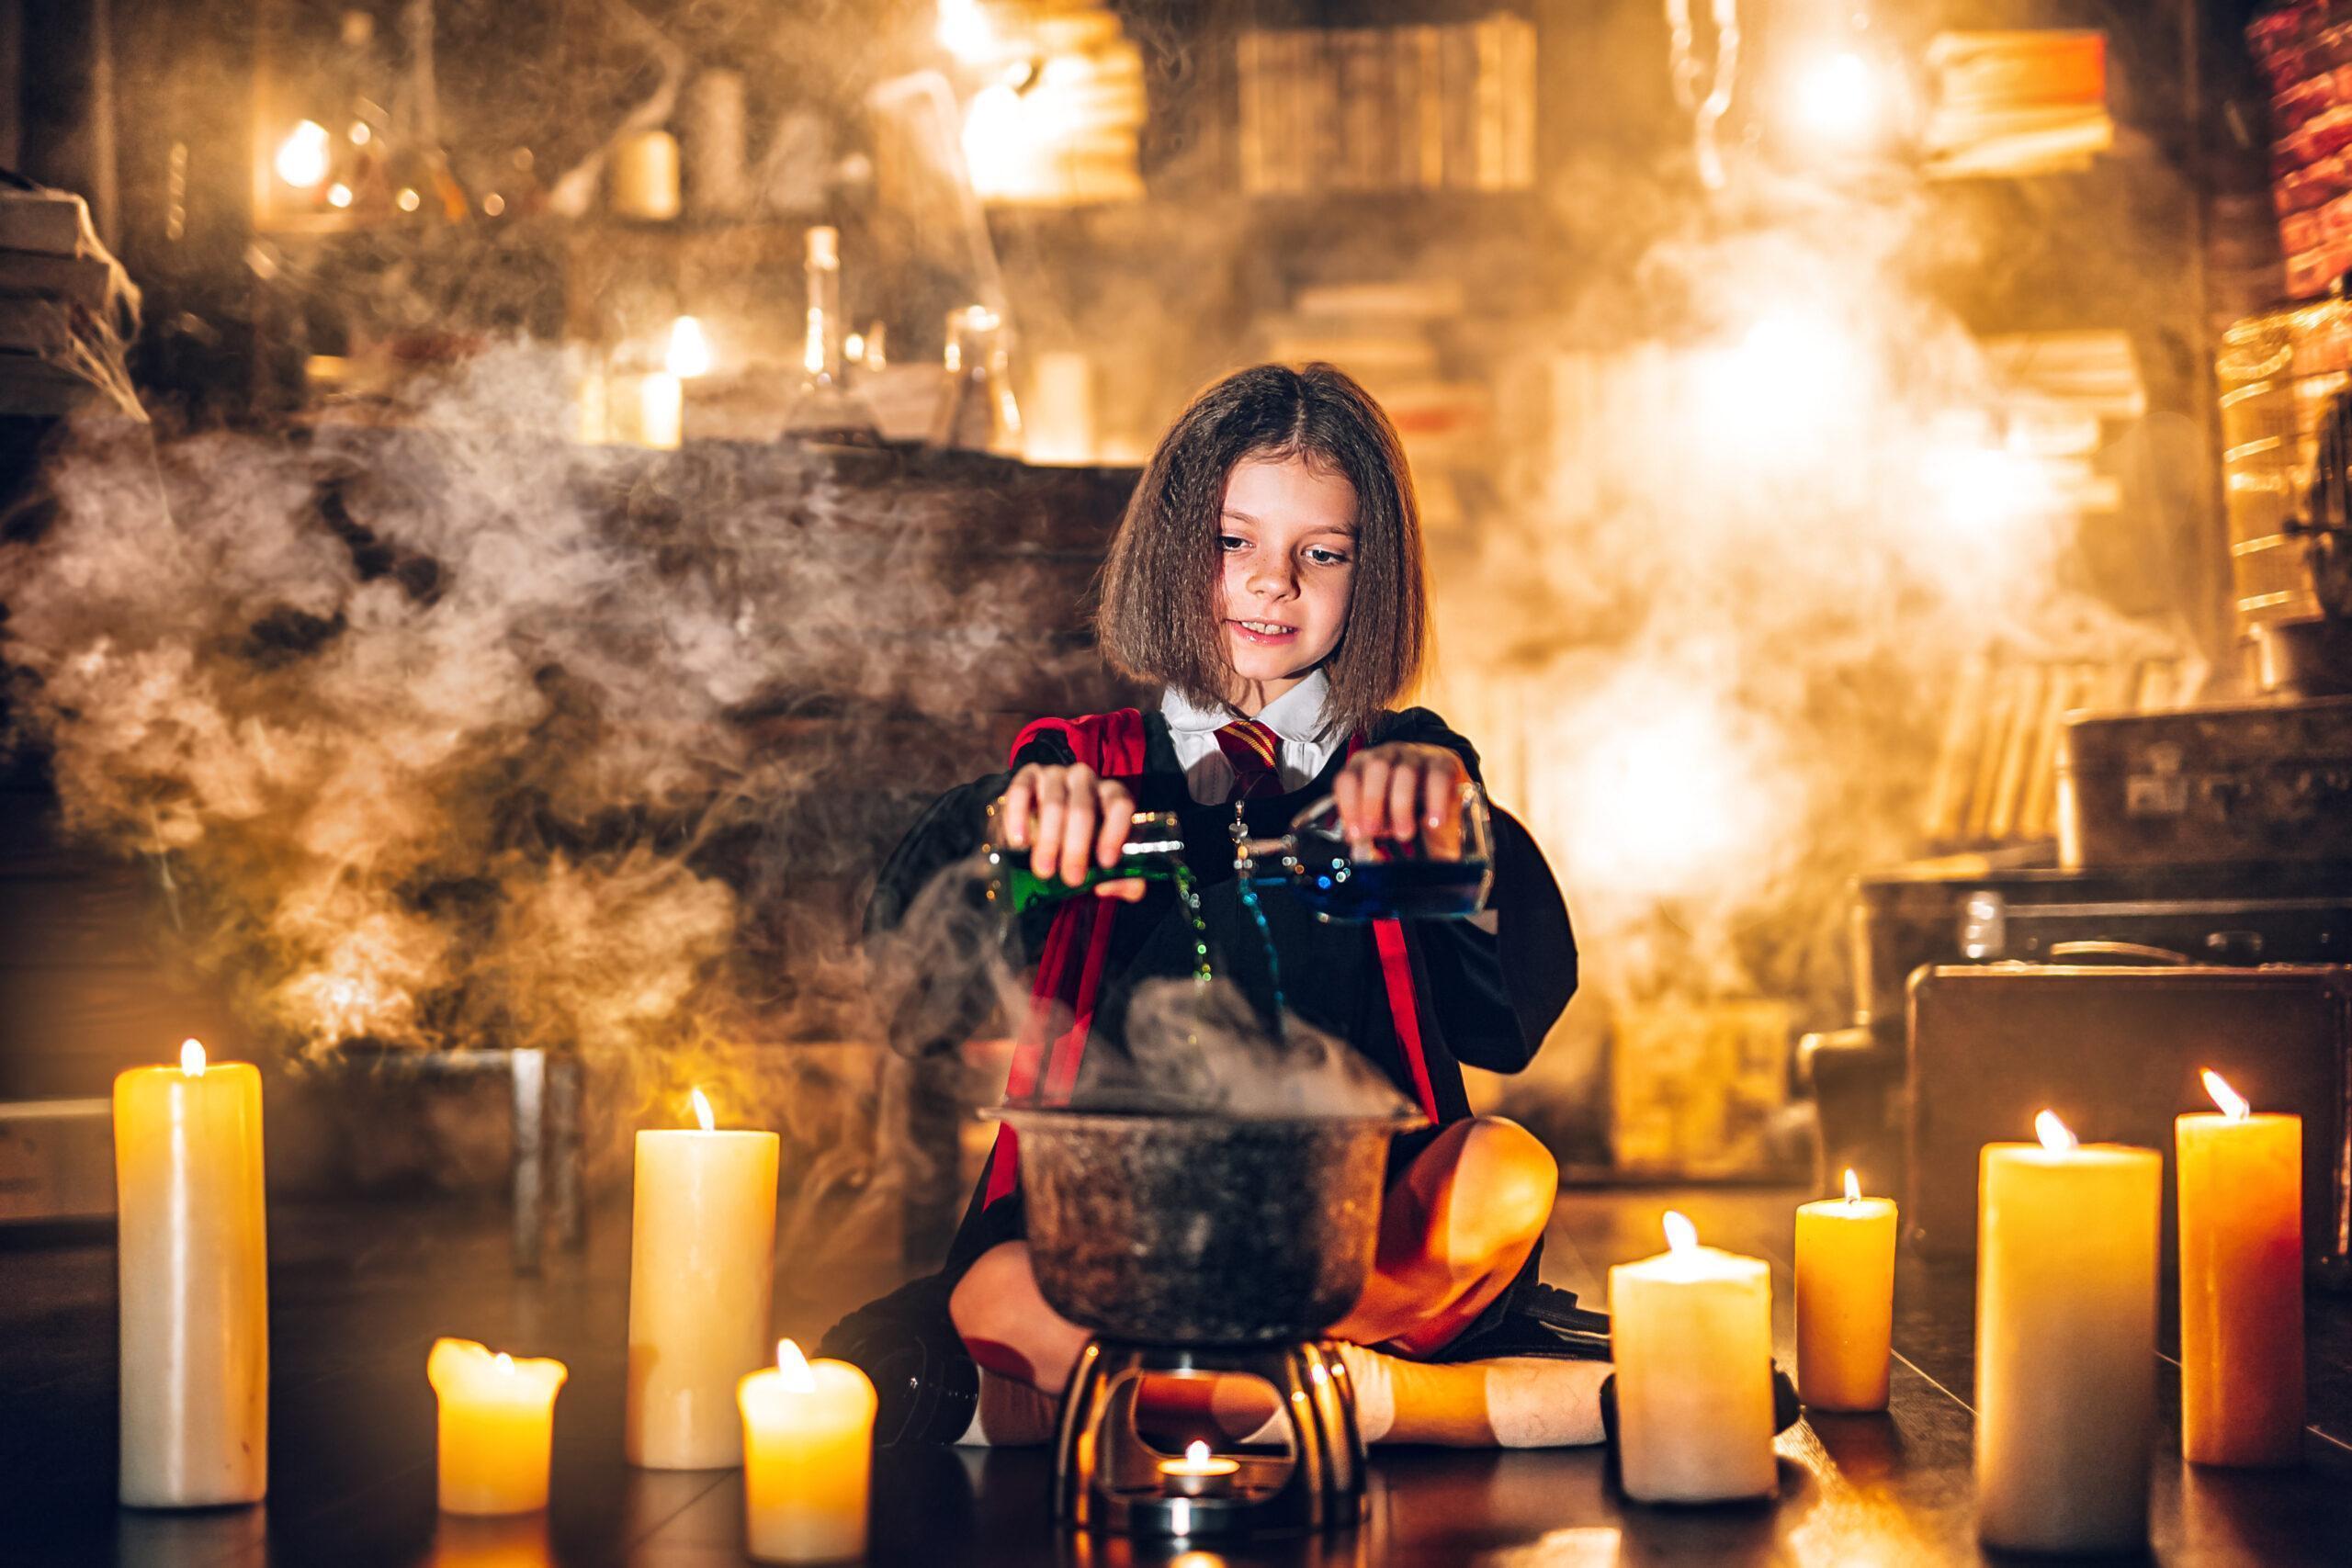 A Harry Potter fan in witch costume pretending to brew a witch's potion in a small cauldron